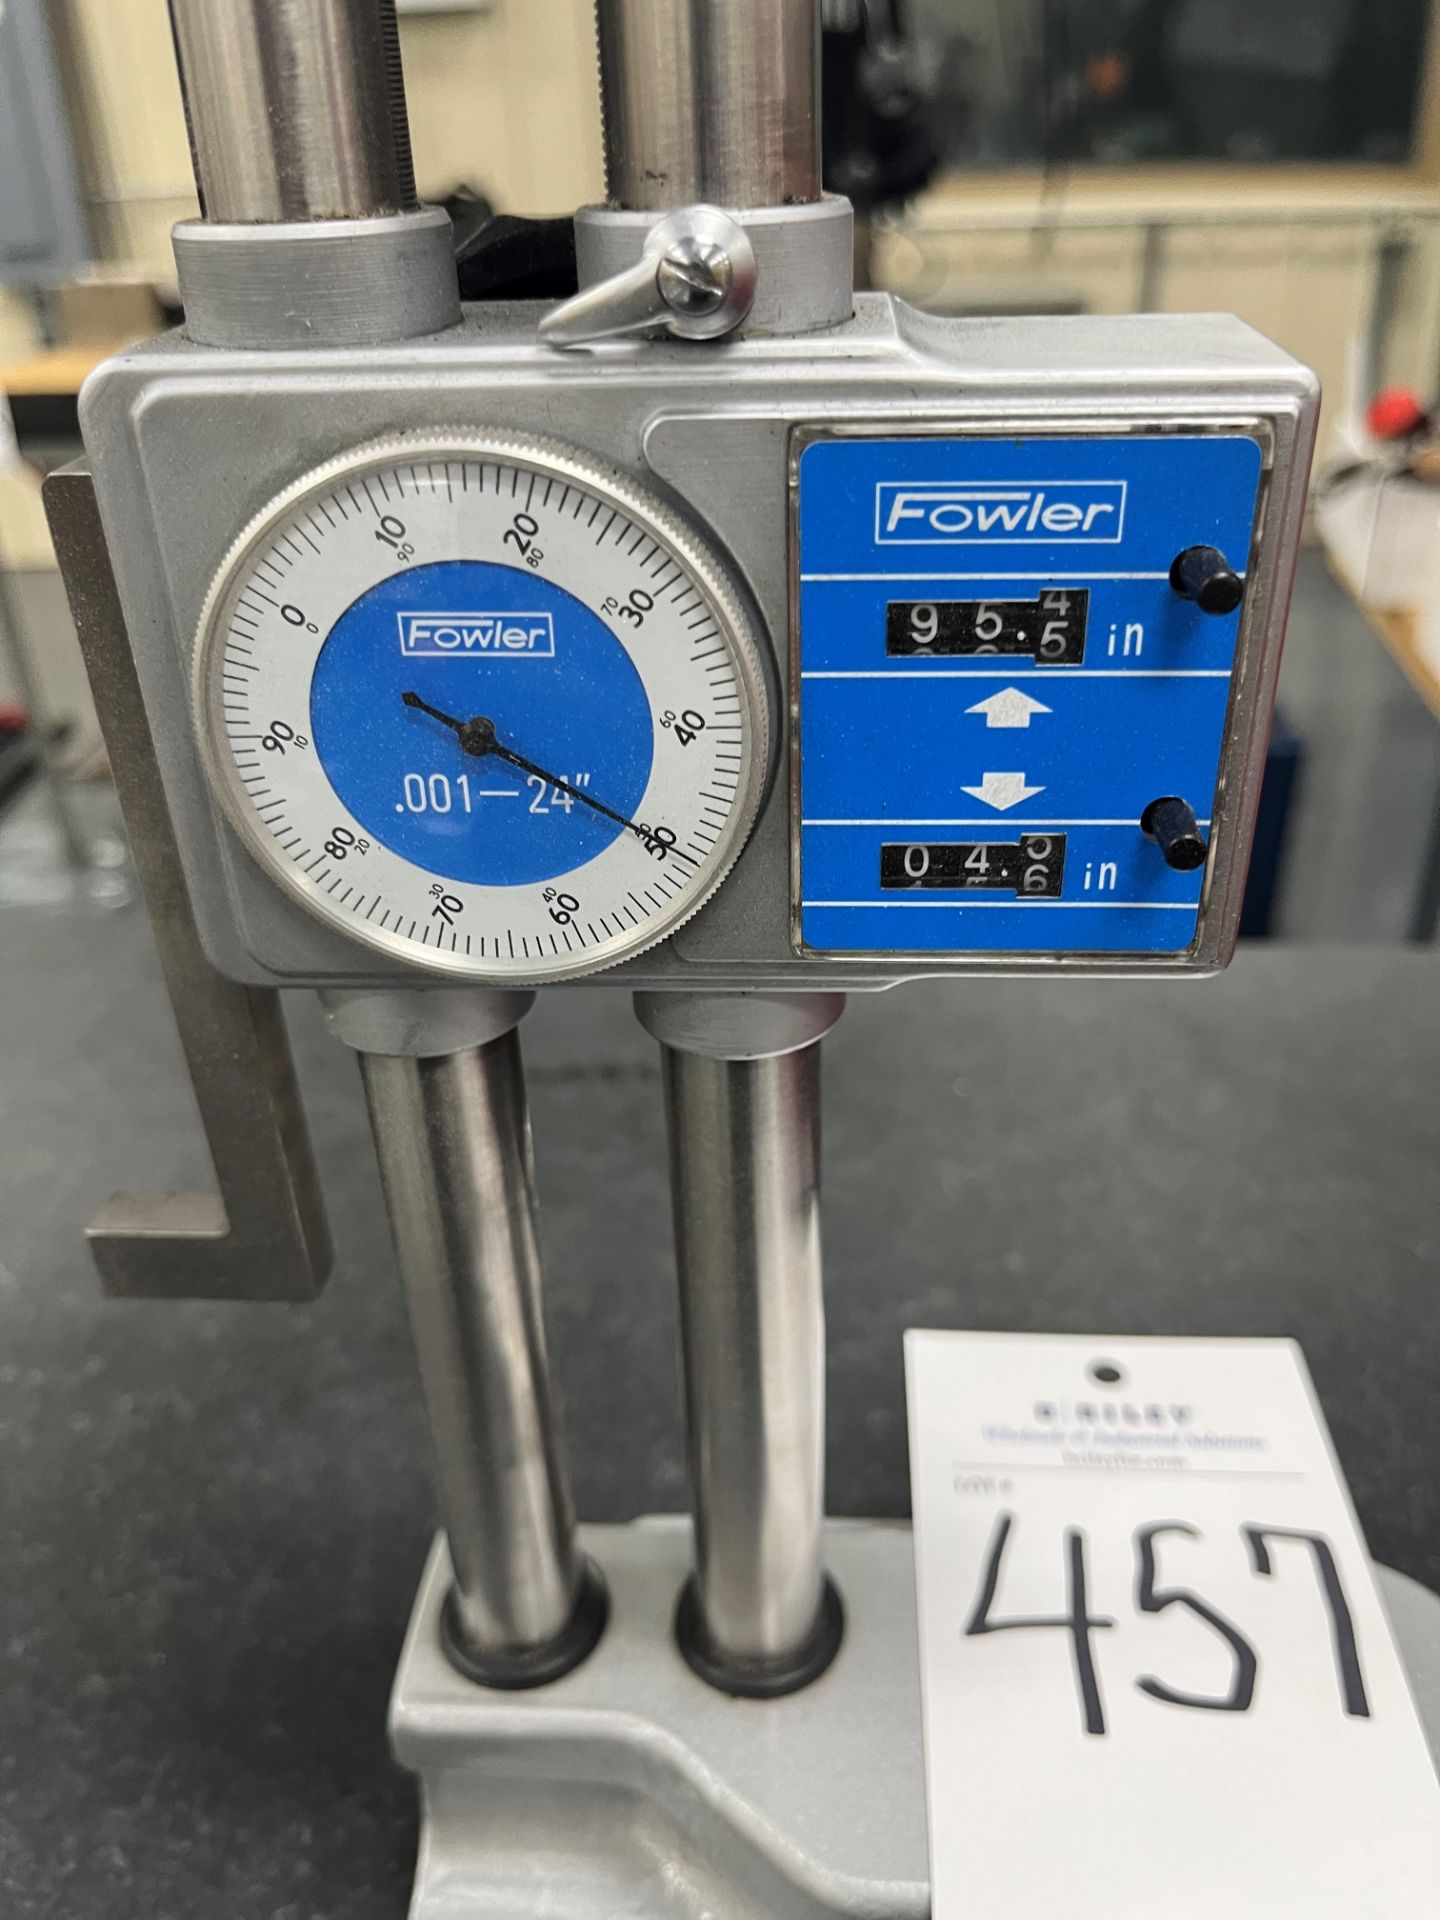 Fowler dial type height gage - Image 2 of 2